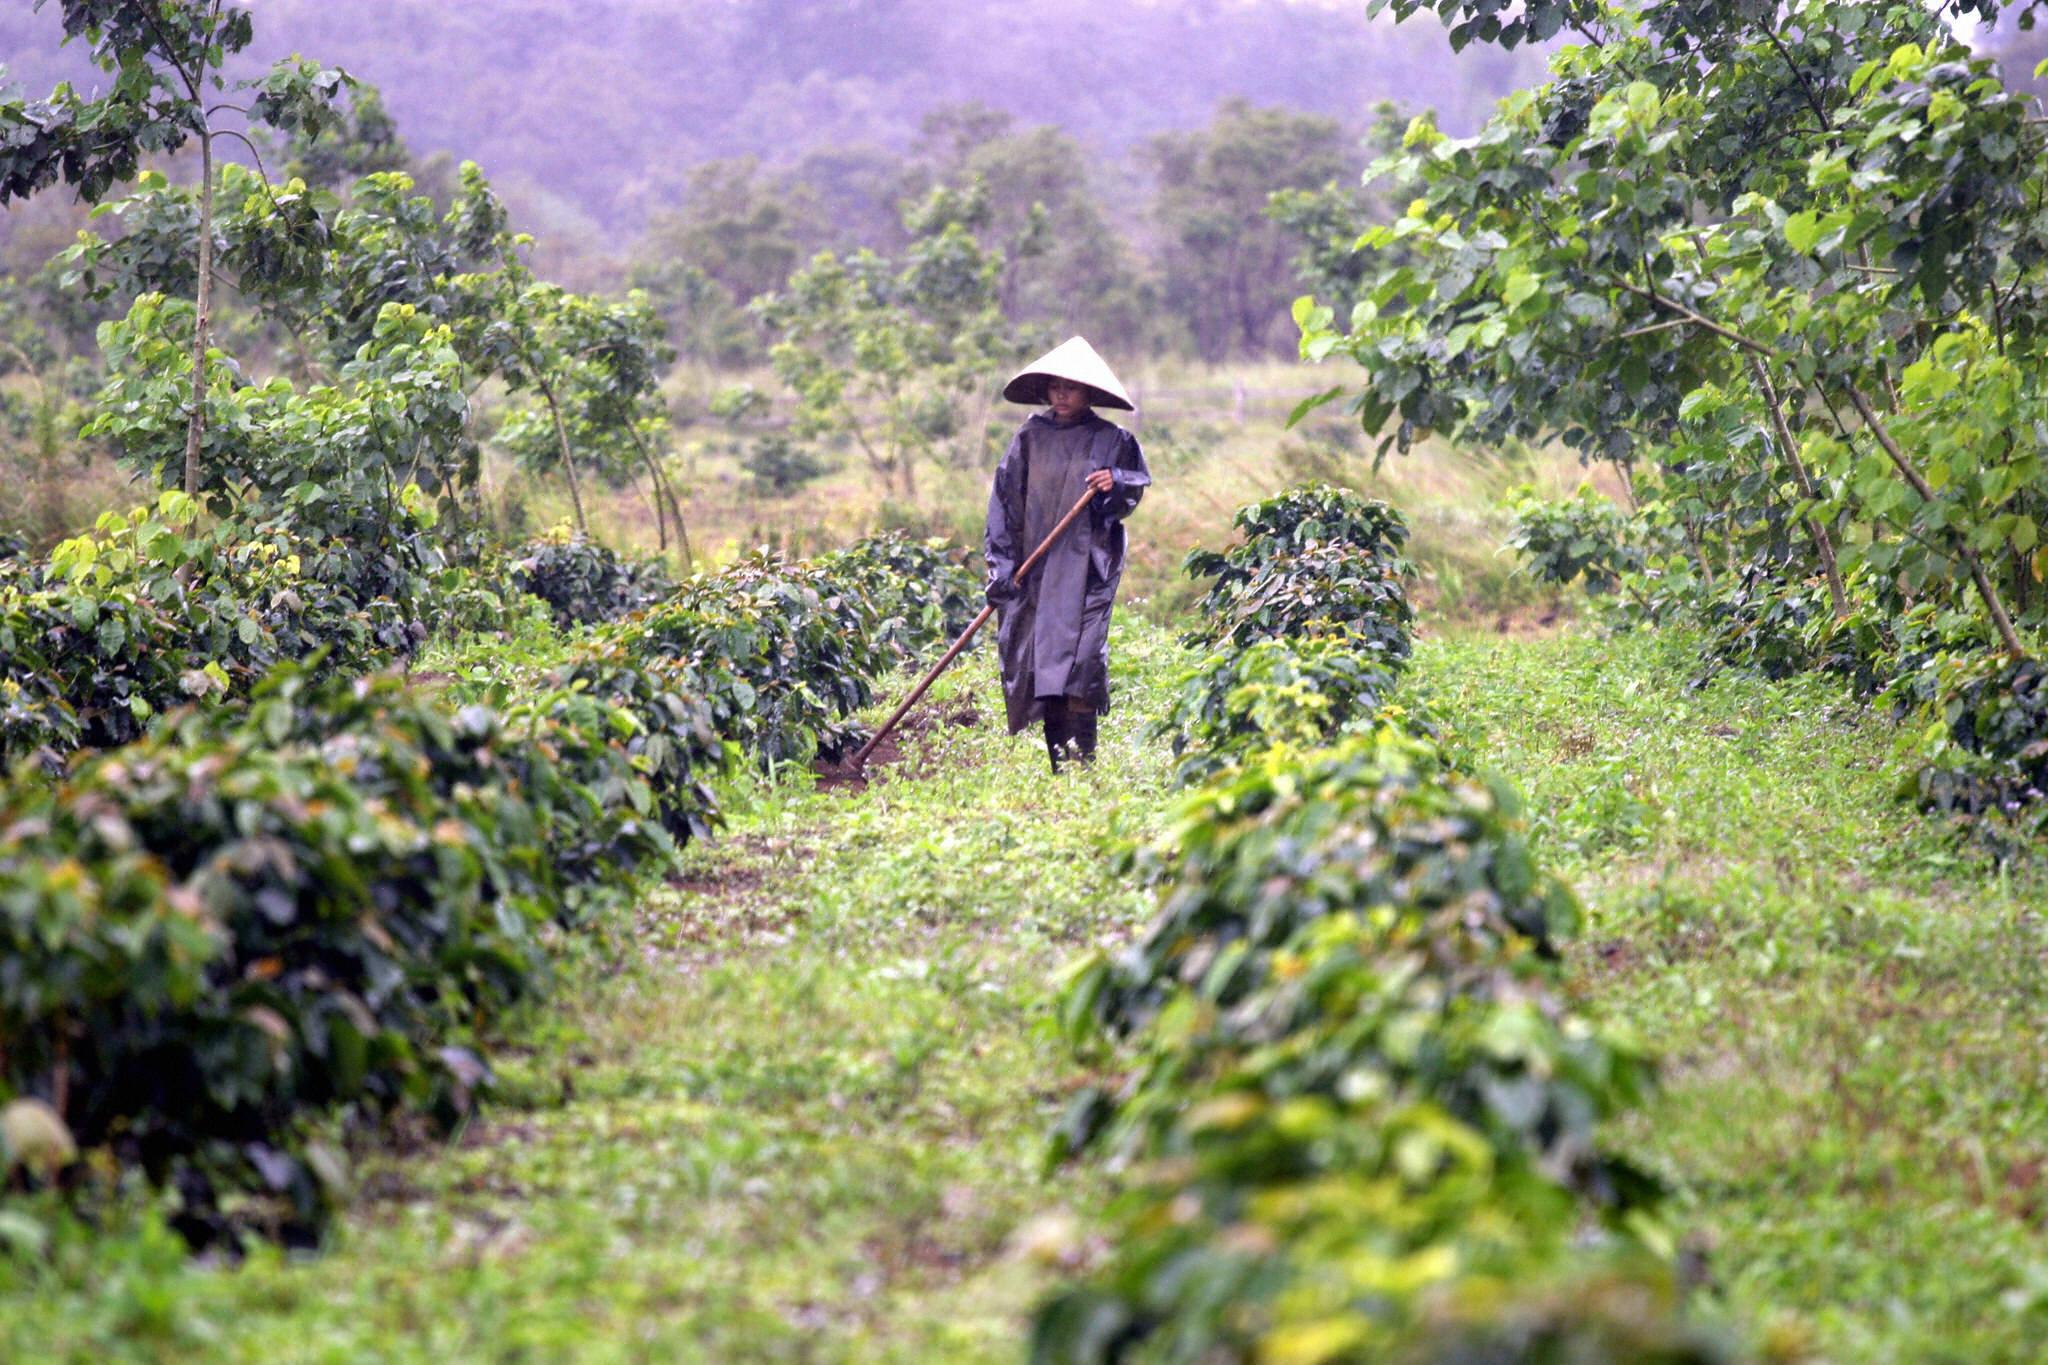 The Bolaven Plateau is a fertile coffee-growing region in southern Laos